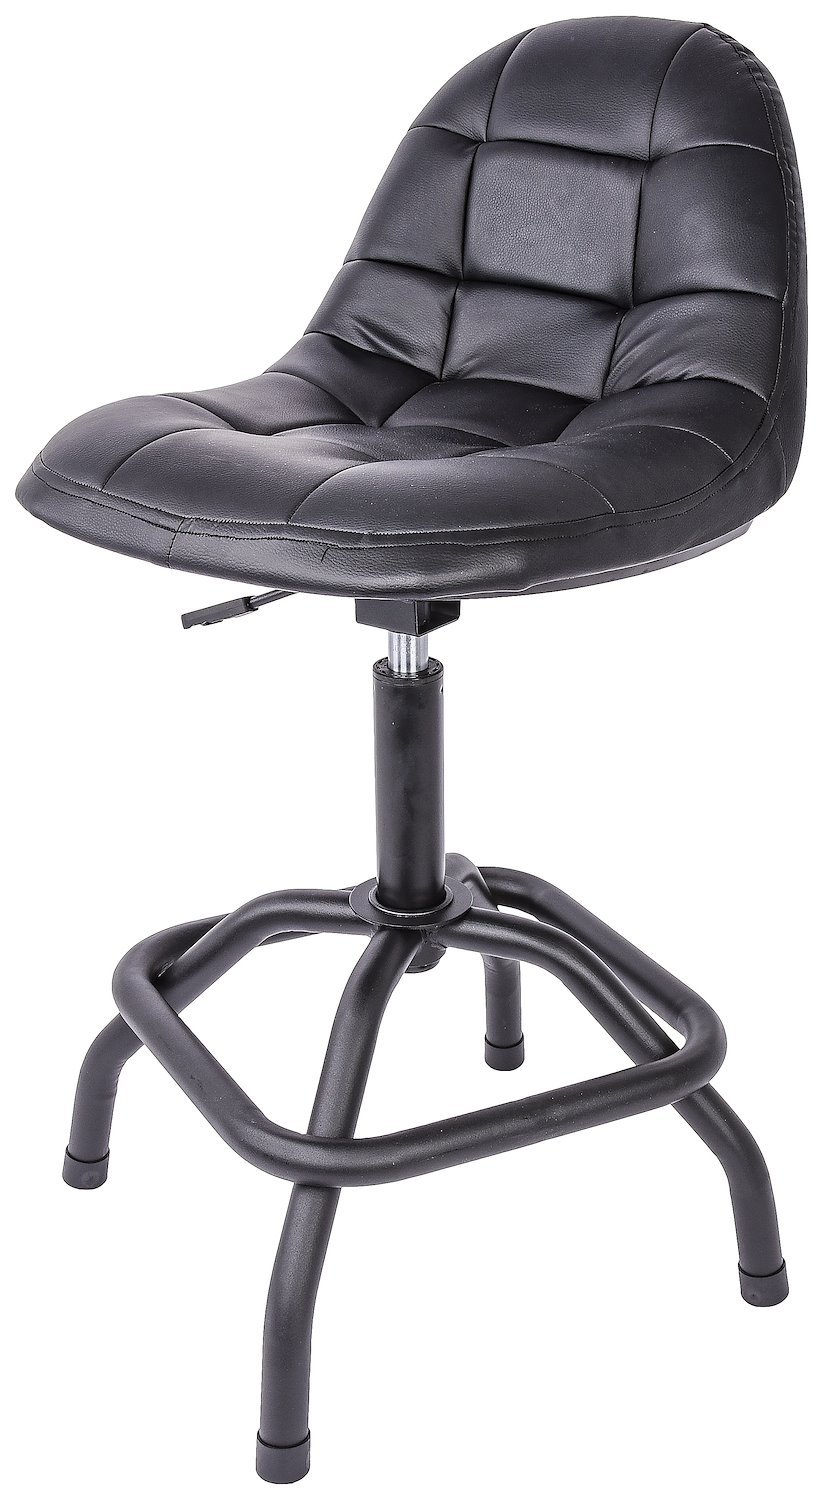 High-Back Pneumatic Swivel Stool Adjustable from 25 in. to 31 in. [330 lb. Weight Capacity]